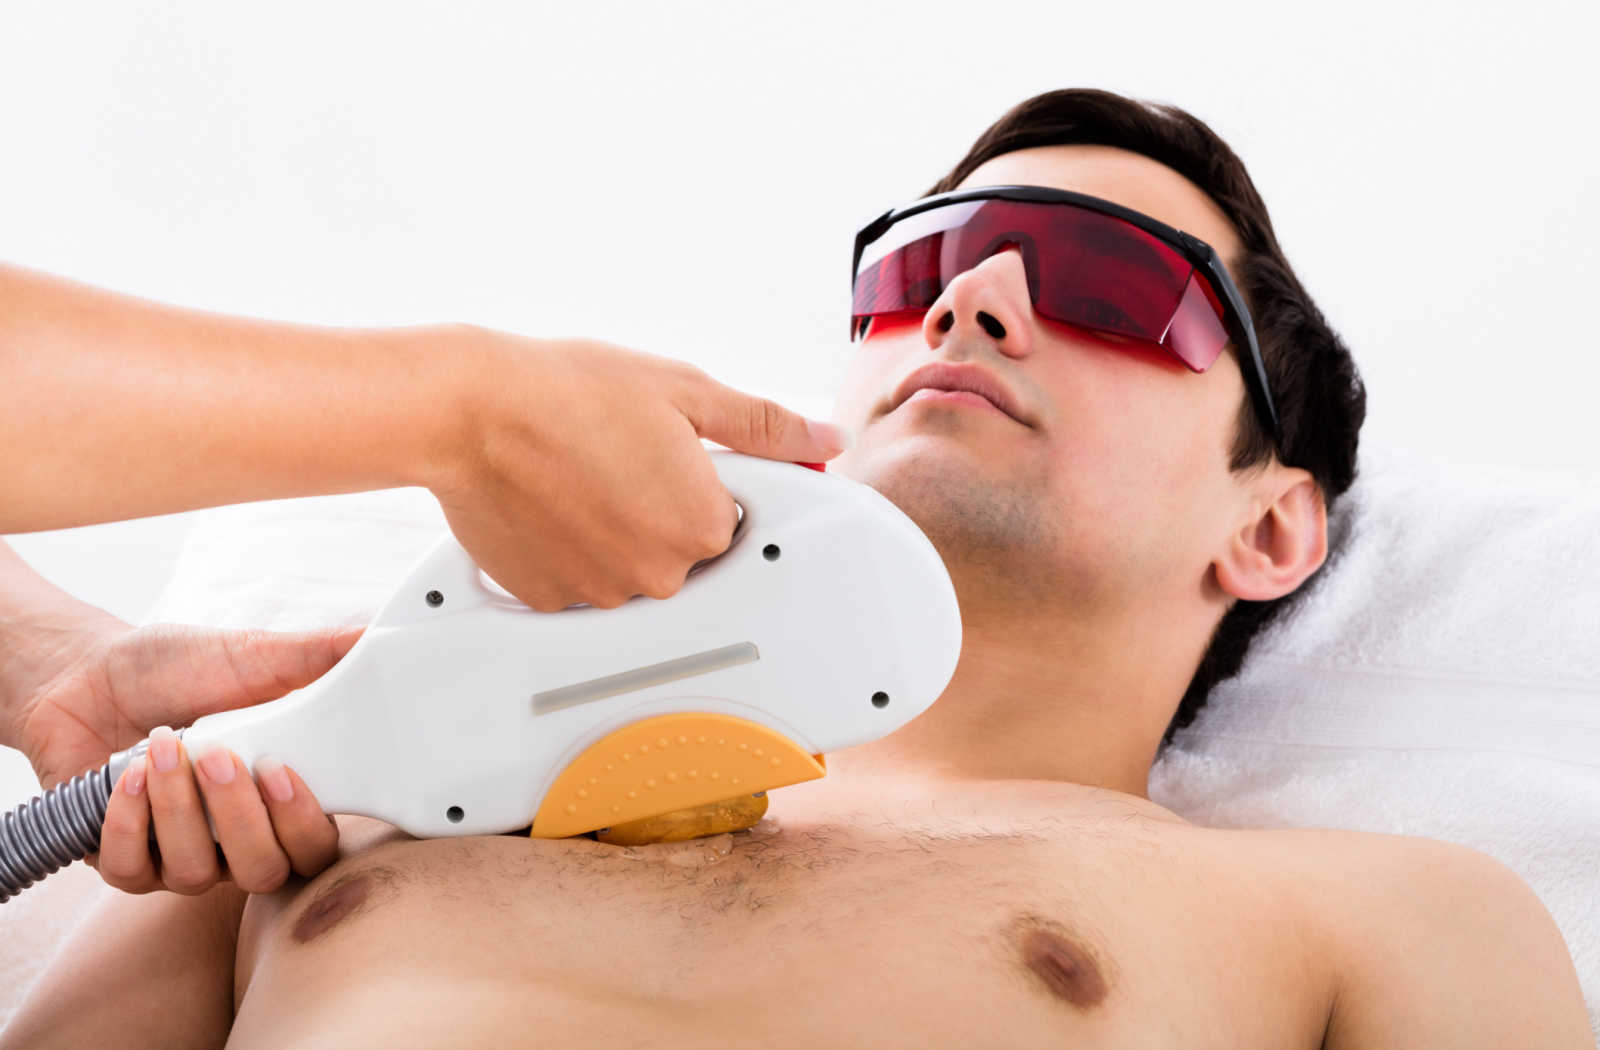 A young man is undergoing laser treatment to remove hair on his chest.
